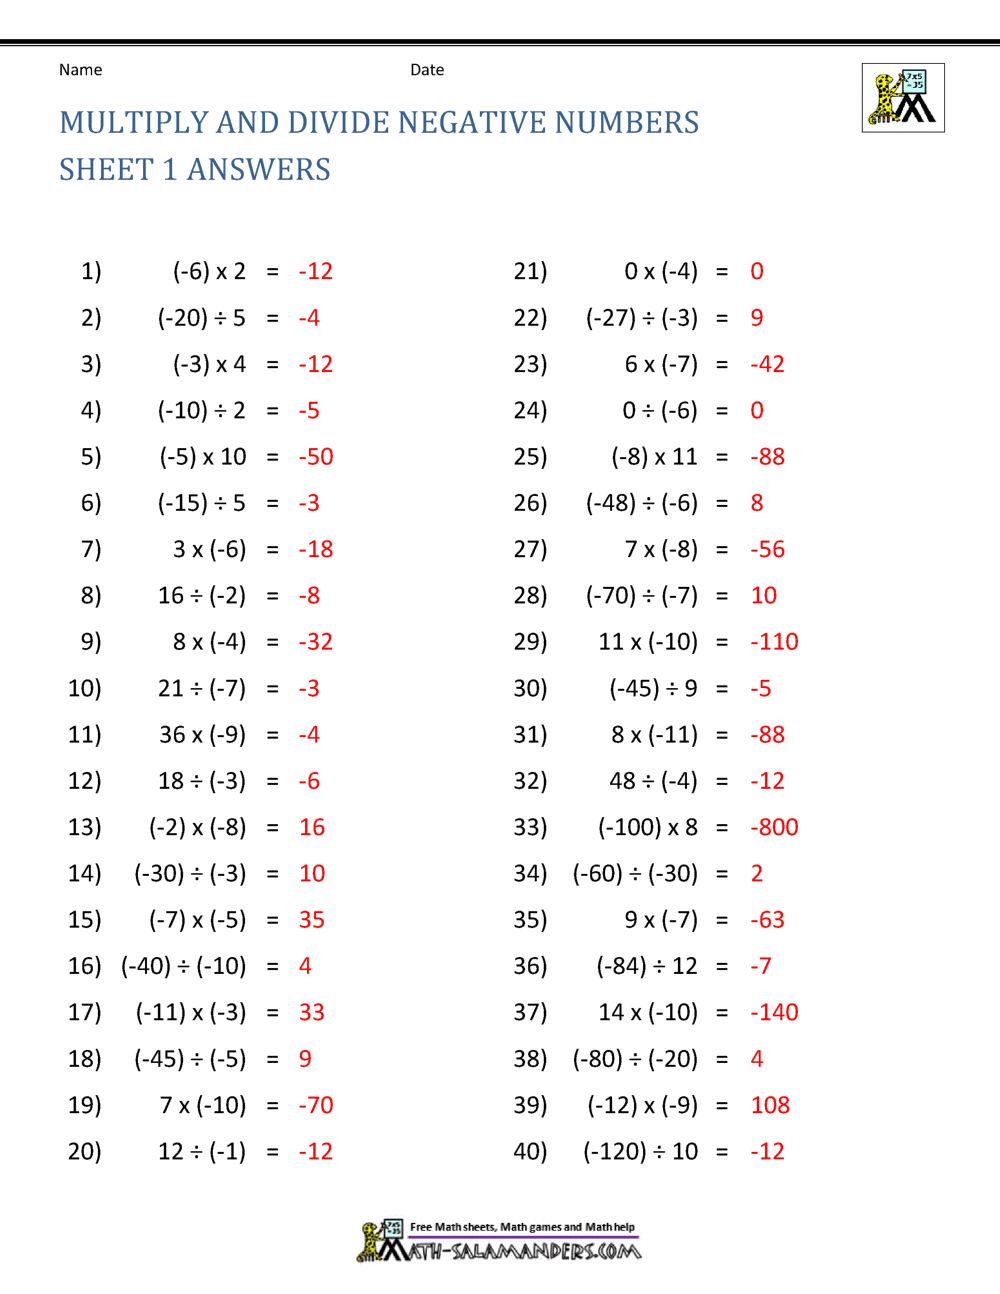 Multiply and Divide Negative Numbers For Multiply And Divide Integers Worksheet